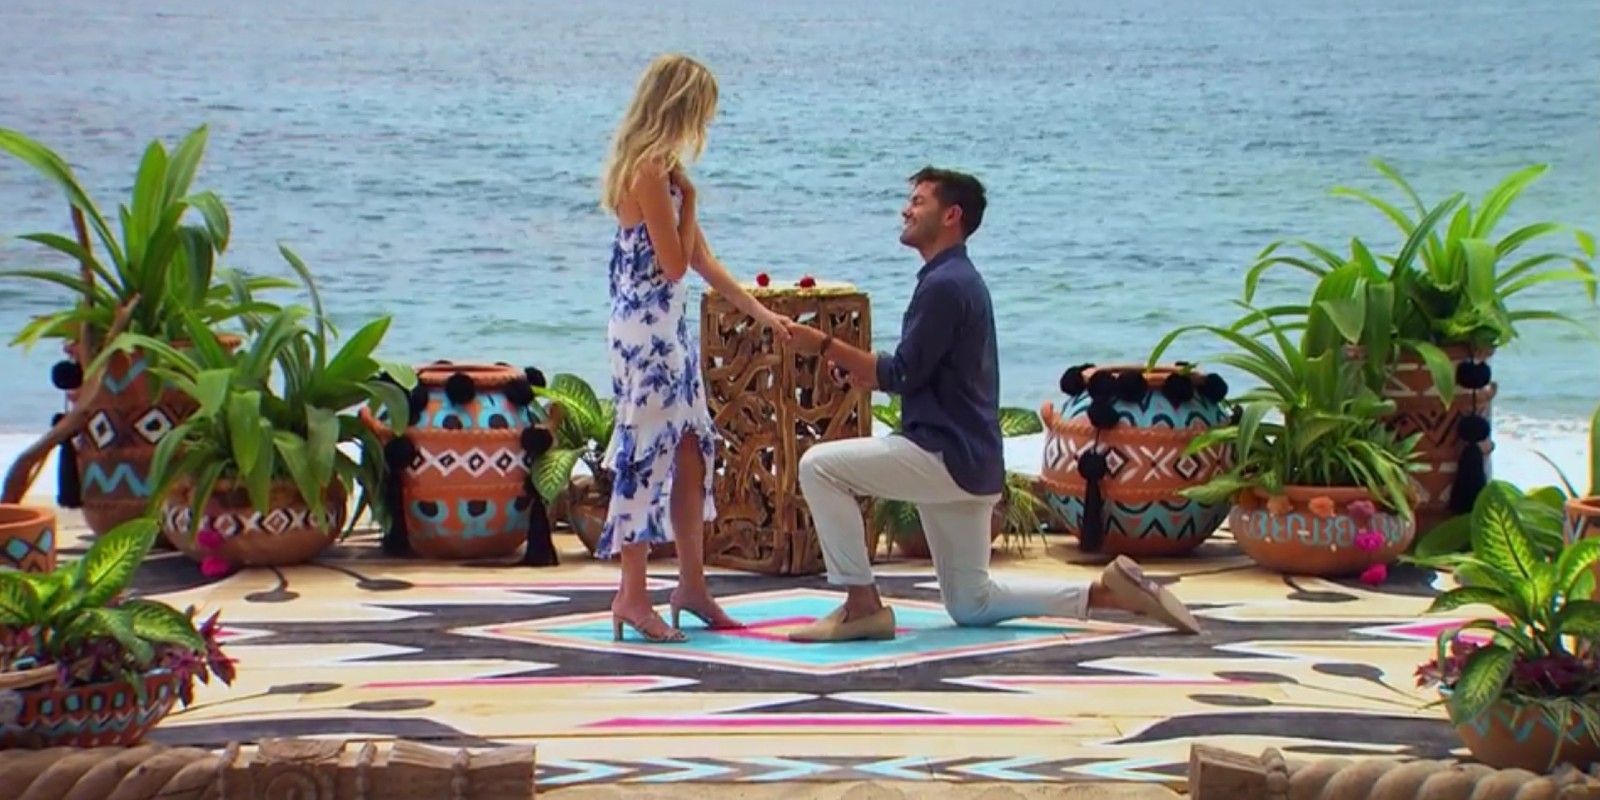 Dylan Barbour proposes to Hannah Godwin in Bachelor in Paradise